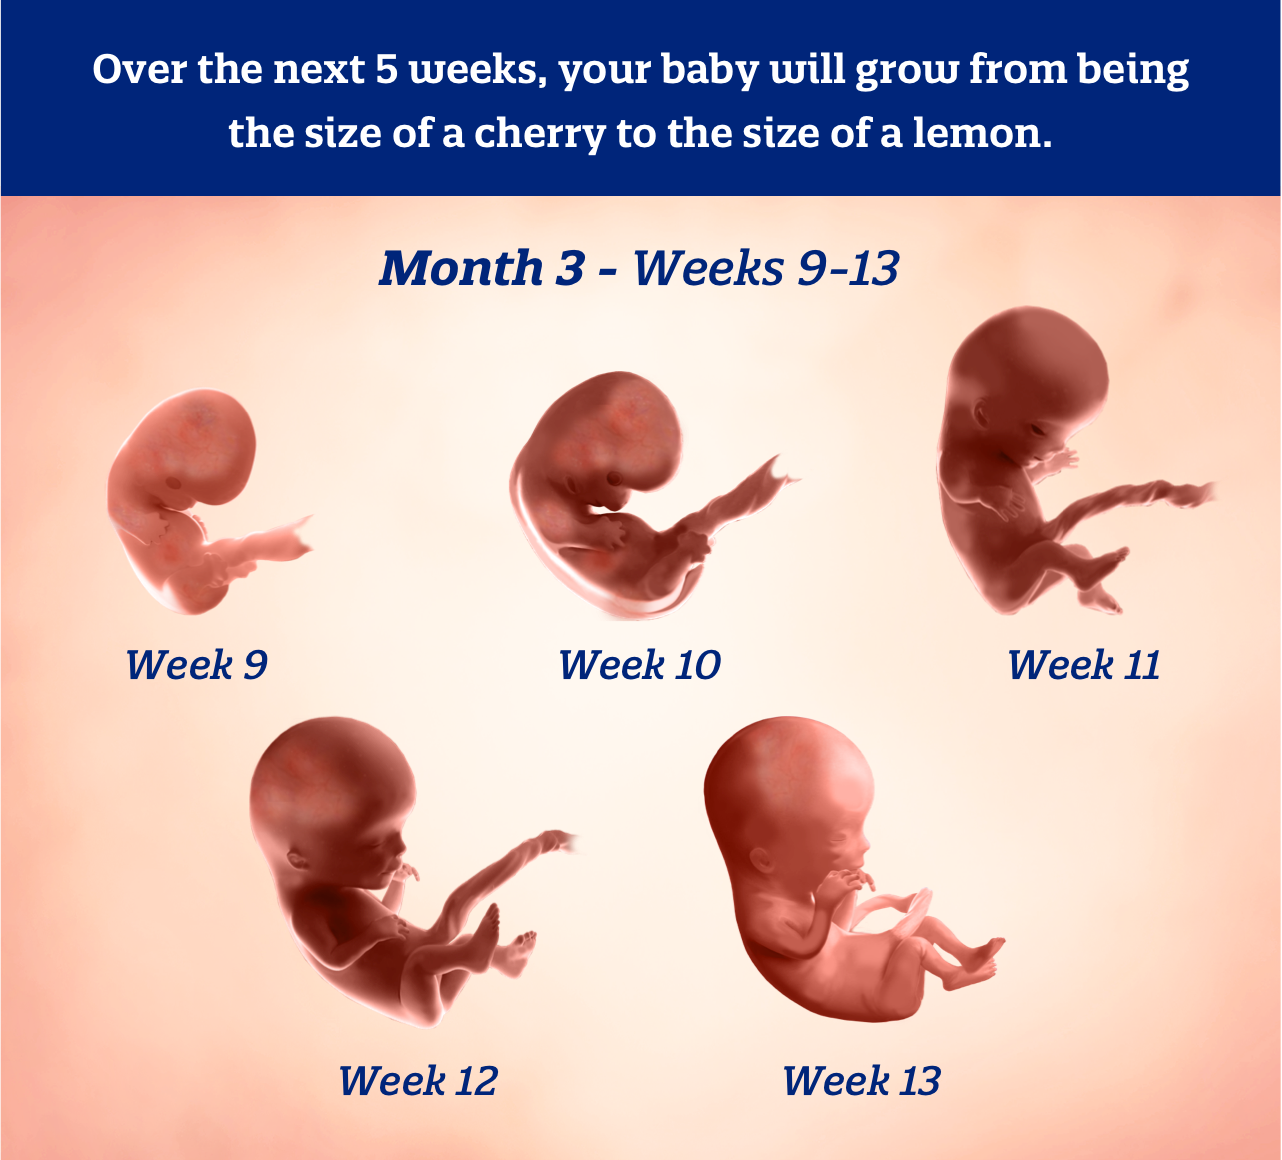 Month 3 weeks 9-13: Over the next 5 weeks,  your baby will grow from being the size of a cherry to the size of a lemon.